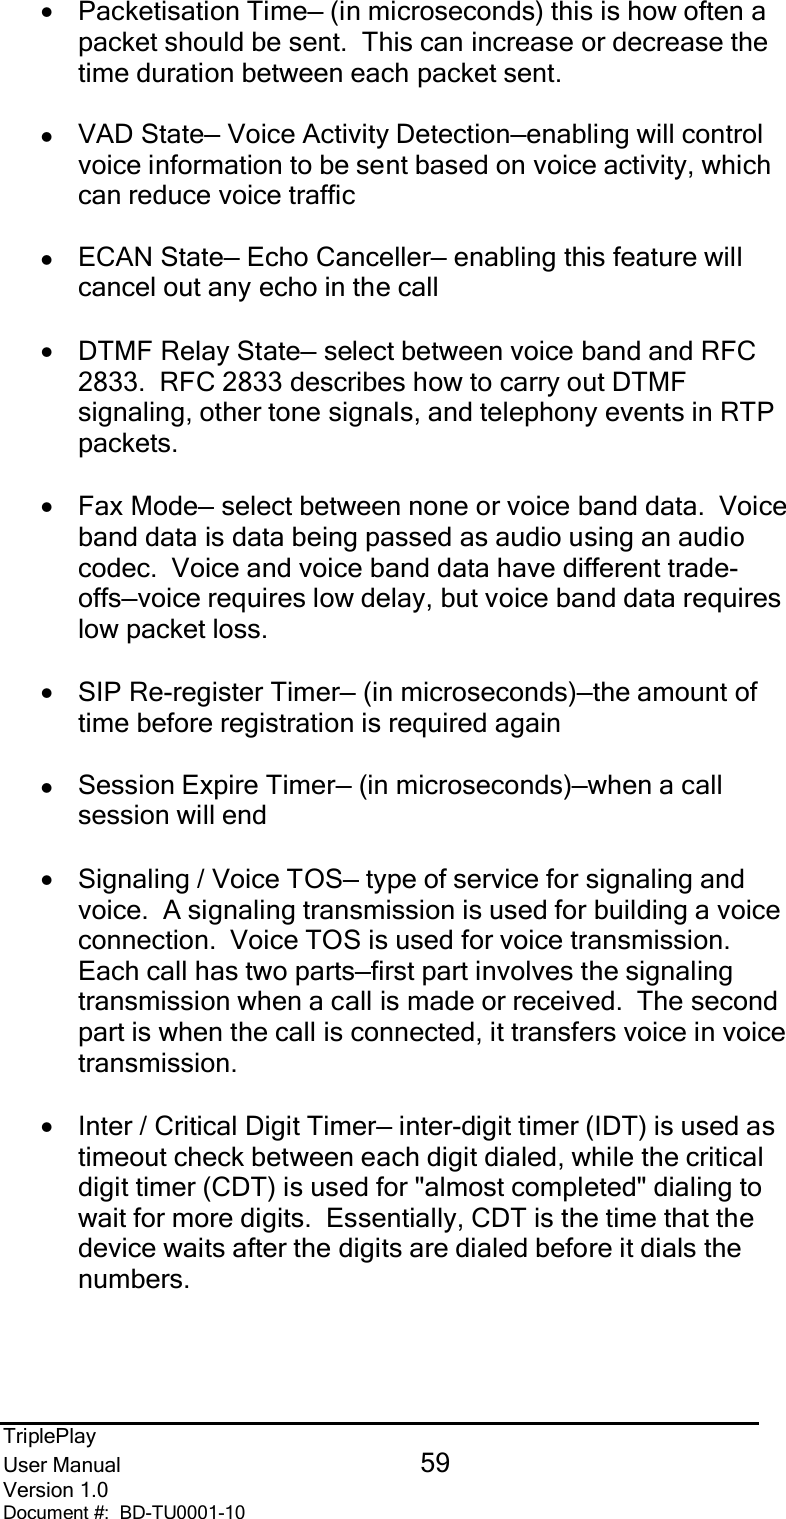 TriplePlayUser Manual 59Version 1.0Document #:  BD-TU0001-10•Packetisation Time— (in microseconds) this is how often apacket should be sent.  This can increase or decrease thetime duration between each packet sent.zVAD State— Voice Activity Detection—enabling will controlvoice information to be sent based on voice activity, whichcan reduce voice trafficzECAN State— Echo Canceller— enabling this feature willcancel out any echo in the call•DTMF Relay State— select between voice band and RFC2833.  RFC 2833 describes how to carry out DTMFsignaling, other tone signals, and telephony events in RTPpackets.•Fax Mode— select between none or voice band data.  Voiceband data is data being passed as audio using an audiocodec.  Voice and voice band data have different trade-offs—voice requires low delay, but voice band data requireslow packet loss.•SIP Re-register Timer— (in microseconds)—the amount oftime before registration is required againzSession Expire Timer— (in microseconds)—when a callsession will end•Signaling / Voice TOS— type of service for signaling andvoice.  A signaling transmission is used for building a voiceconnection.  Voice TOS is used for voice transmission.Each call has two parts—first part involves the signalingtransmission when a call is made or received.  The secondpart is when the call is connected, it transfers voice in voicetransmission.•Inter / Critical Digit Timer— inter-digit timer (IDT) is used astimeout check between each digit dialed, while the criticaldigit timer (CDT) is used for &quot;almost completed&quot; dialing towait for more digits.  Essentially, CDT is the time that thedevice waits after the digits are dialed before it dials thenumbers.